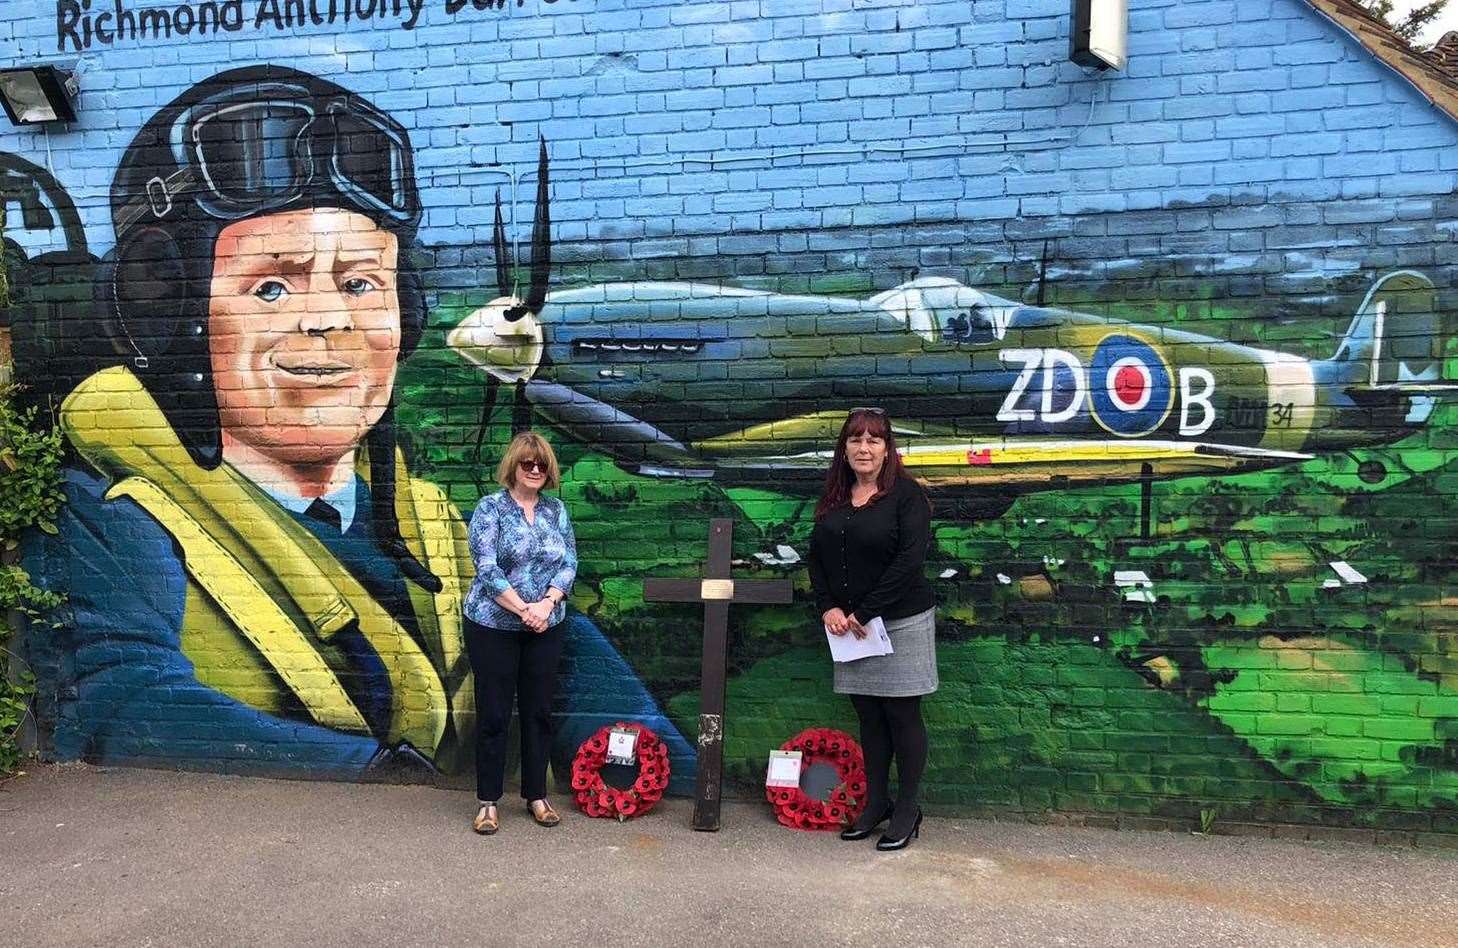 Cllr Jackie Bennett and live-in manager of The Hop Pole Inn, Rosalind Barker, in front of the mural for Richmond Anthony Barrett Blumer at the remembrance service for him on Saturday. Picture: The Hop Pole Inn